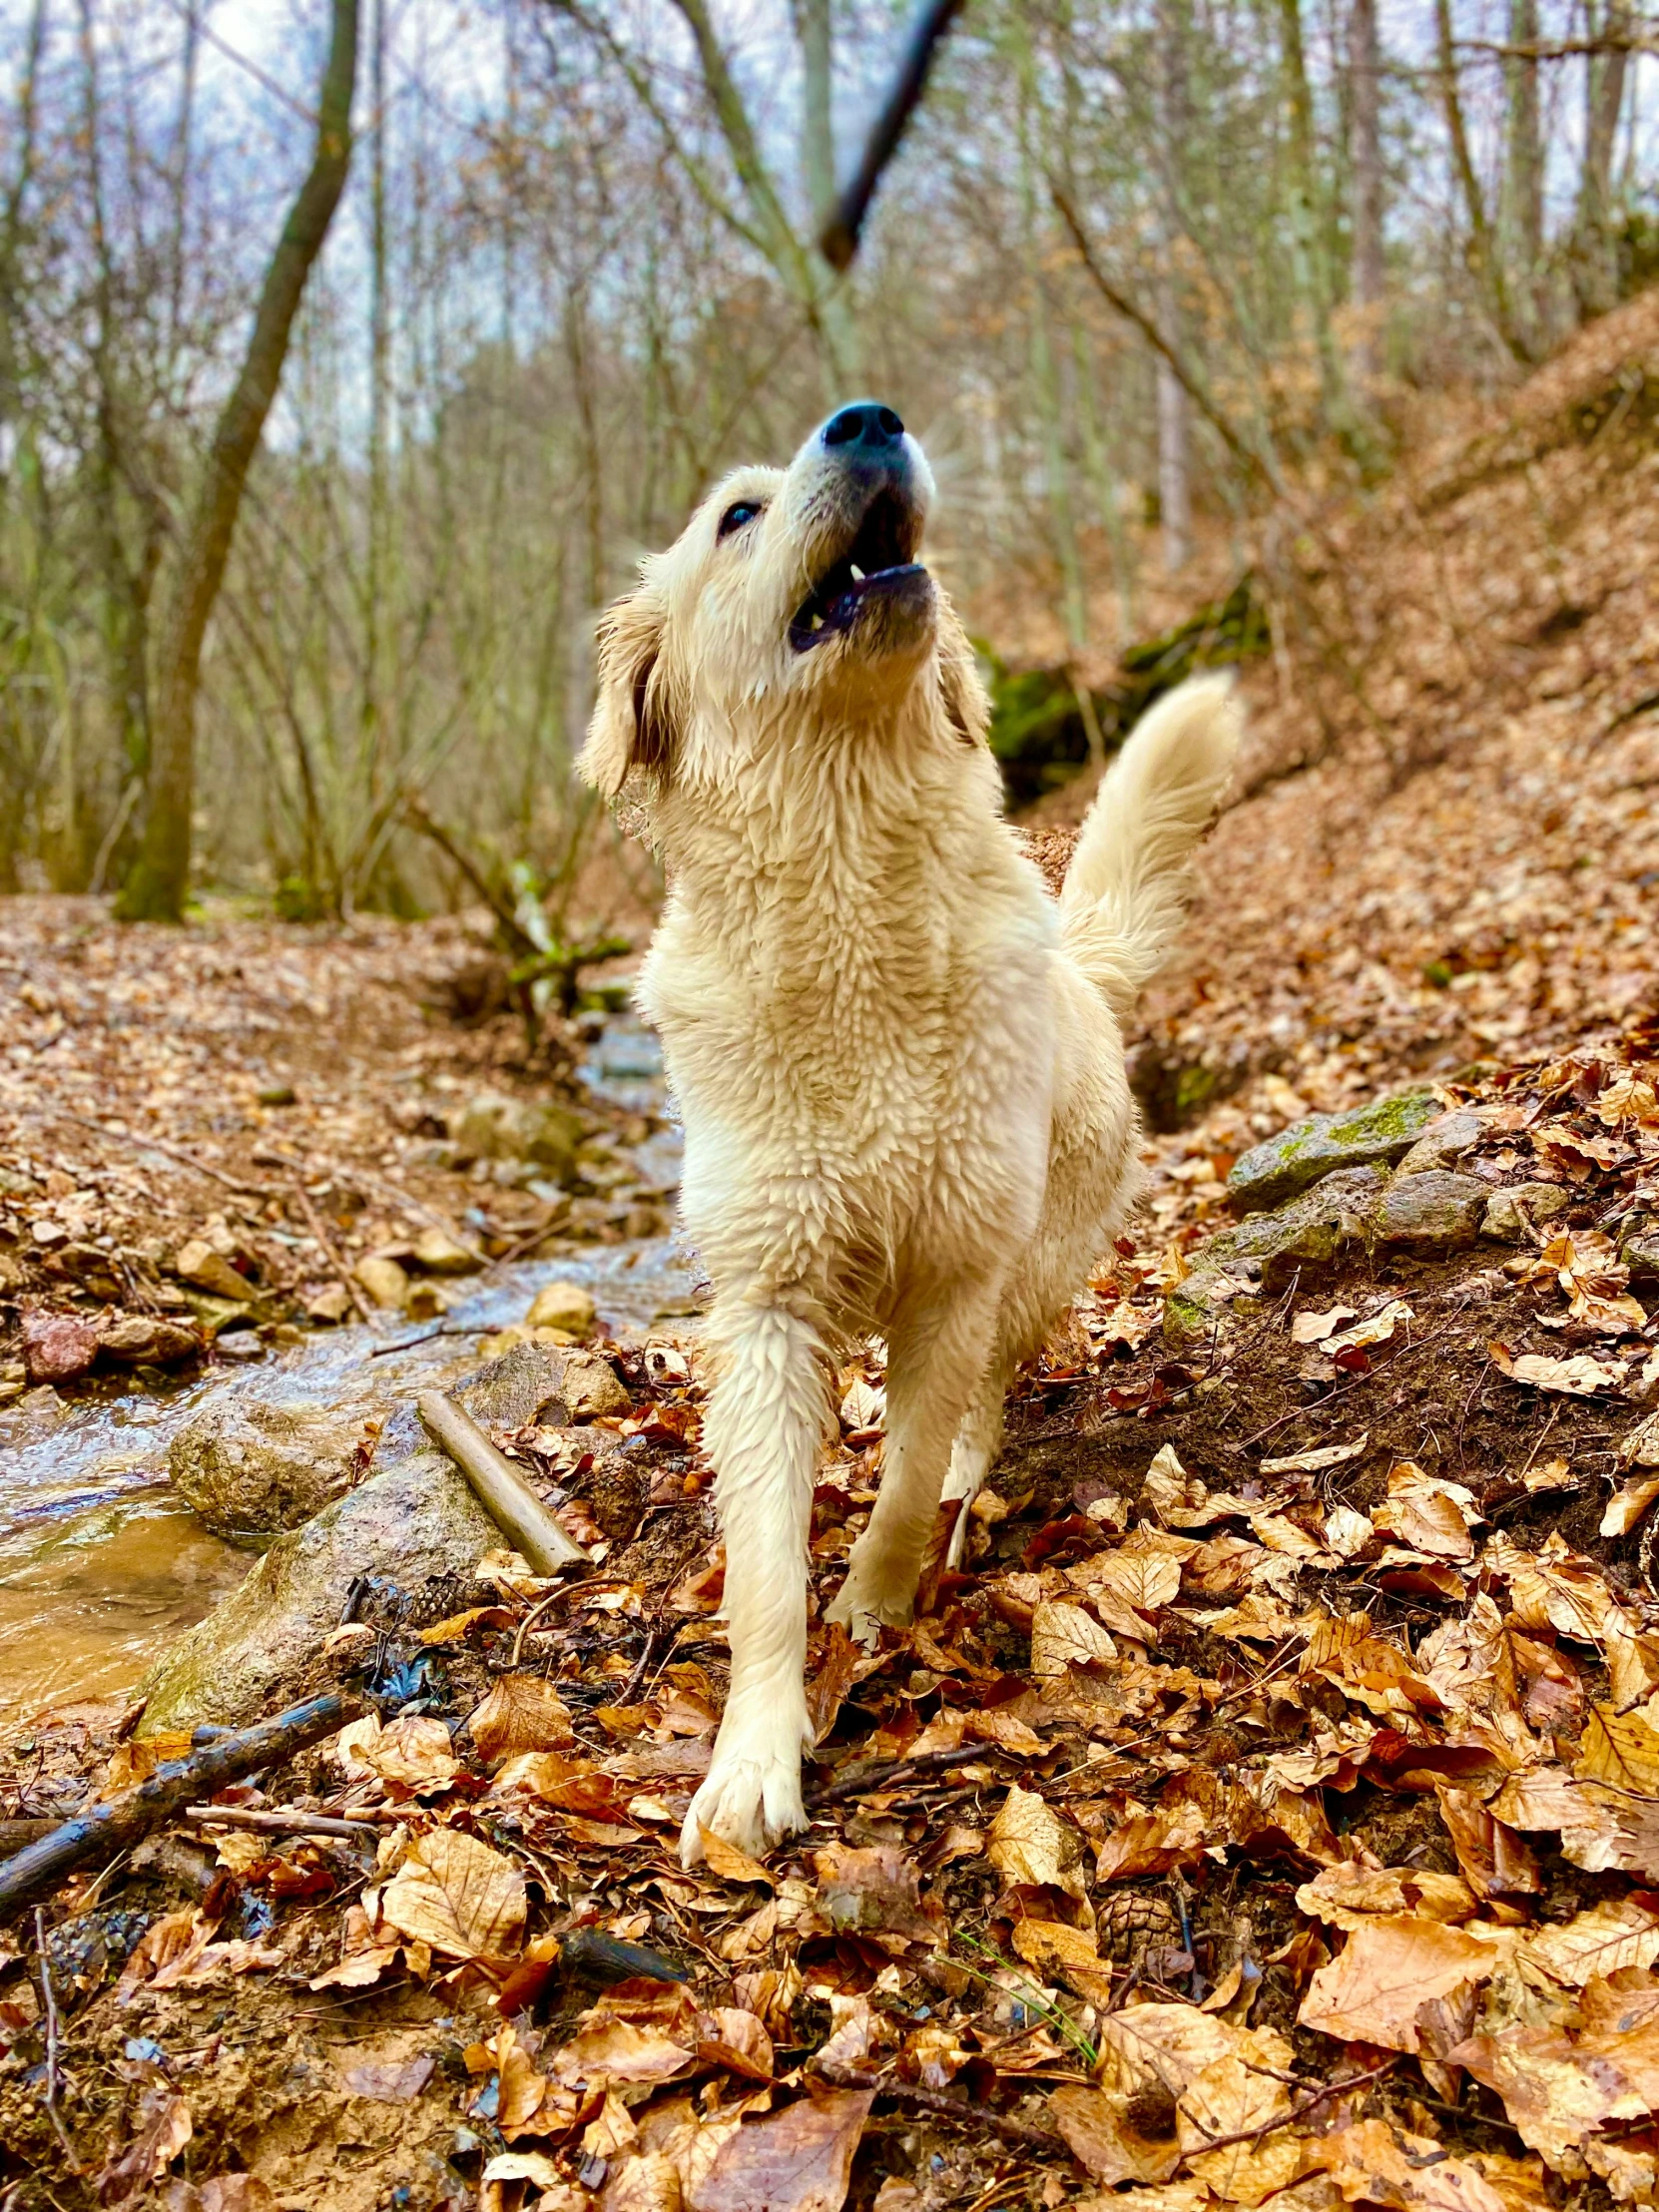 a dog standing on leaves in a wooded area